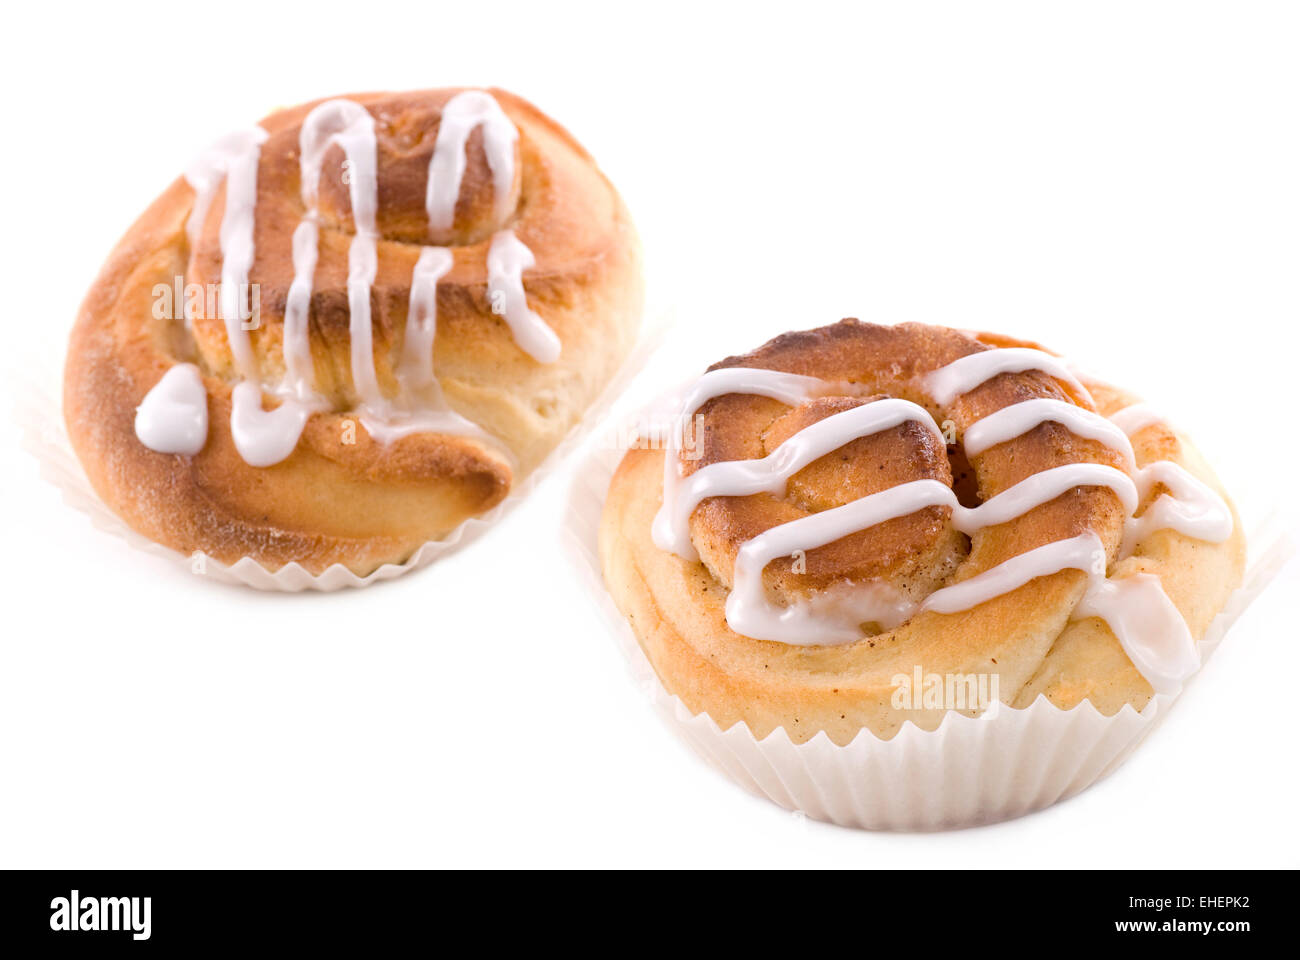 Two cinnamon buns with icing on white background. Stock Photo